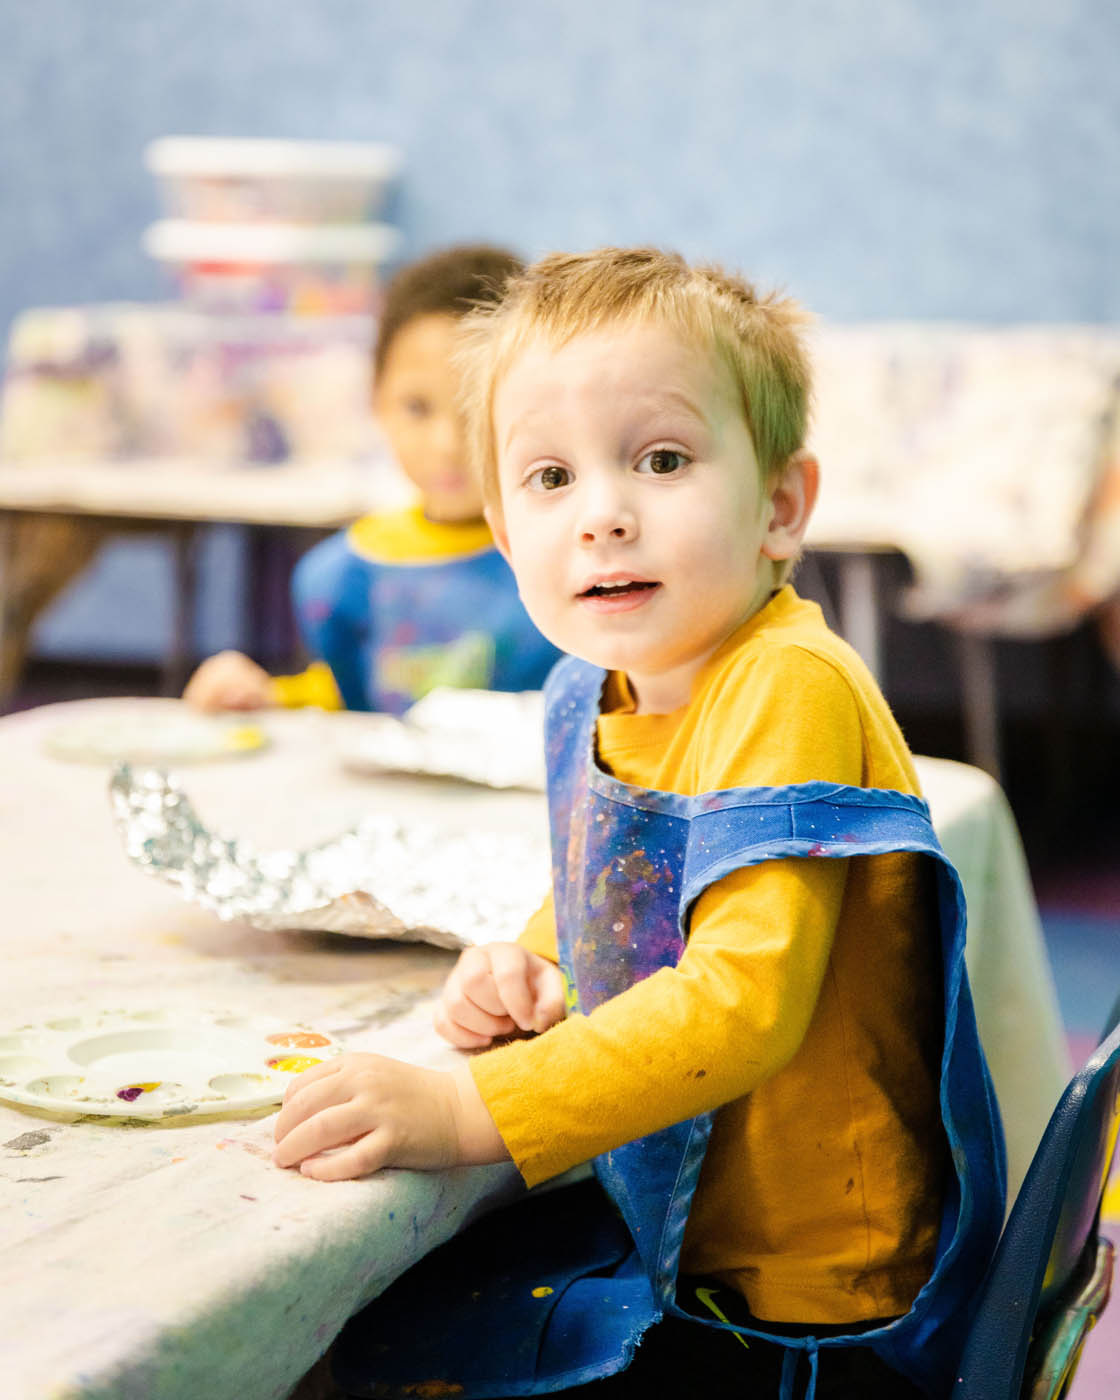 A boy in a yellow shirt in a Charlotte toddler art class at Romp n' Roll.